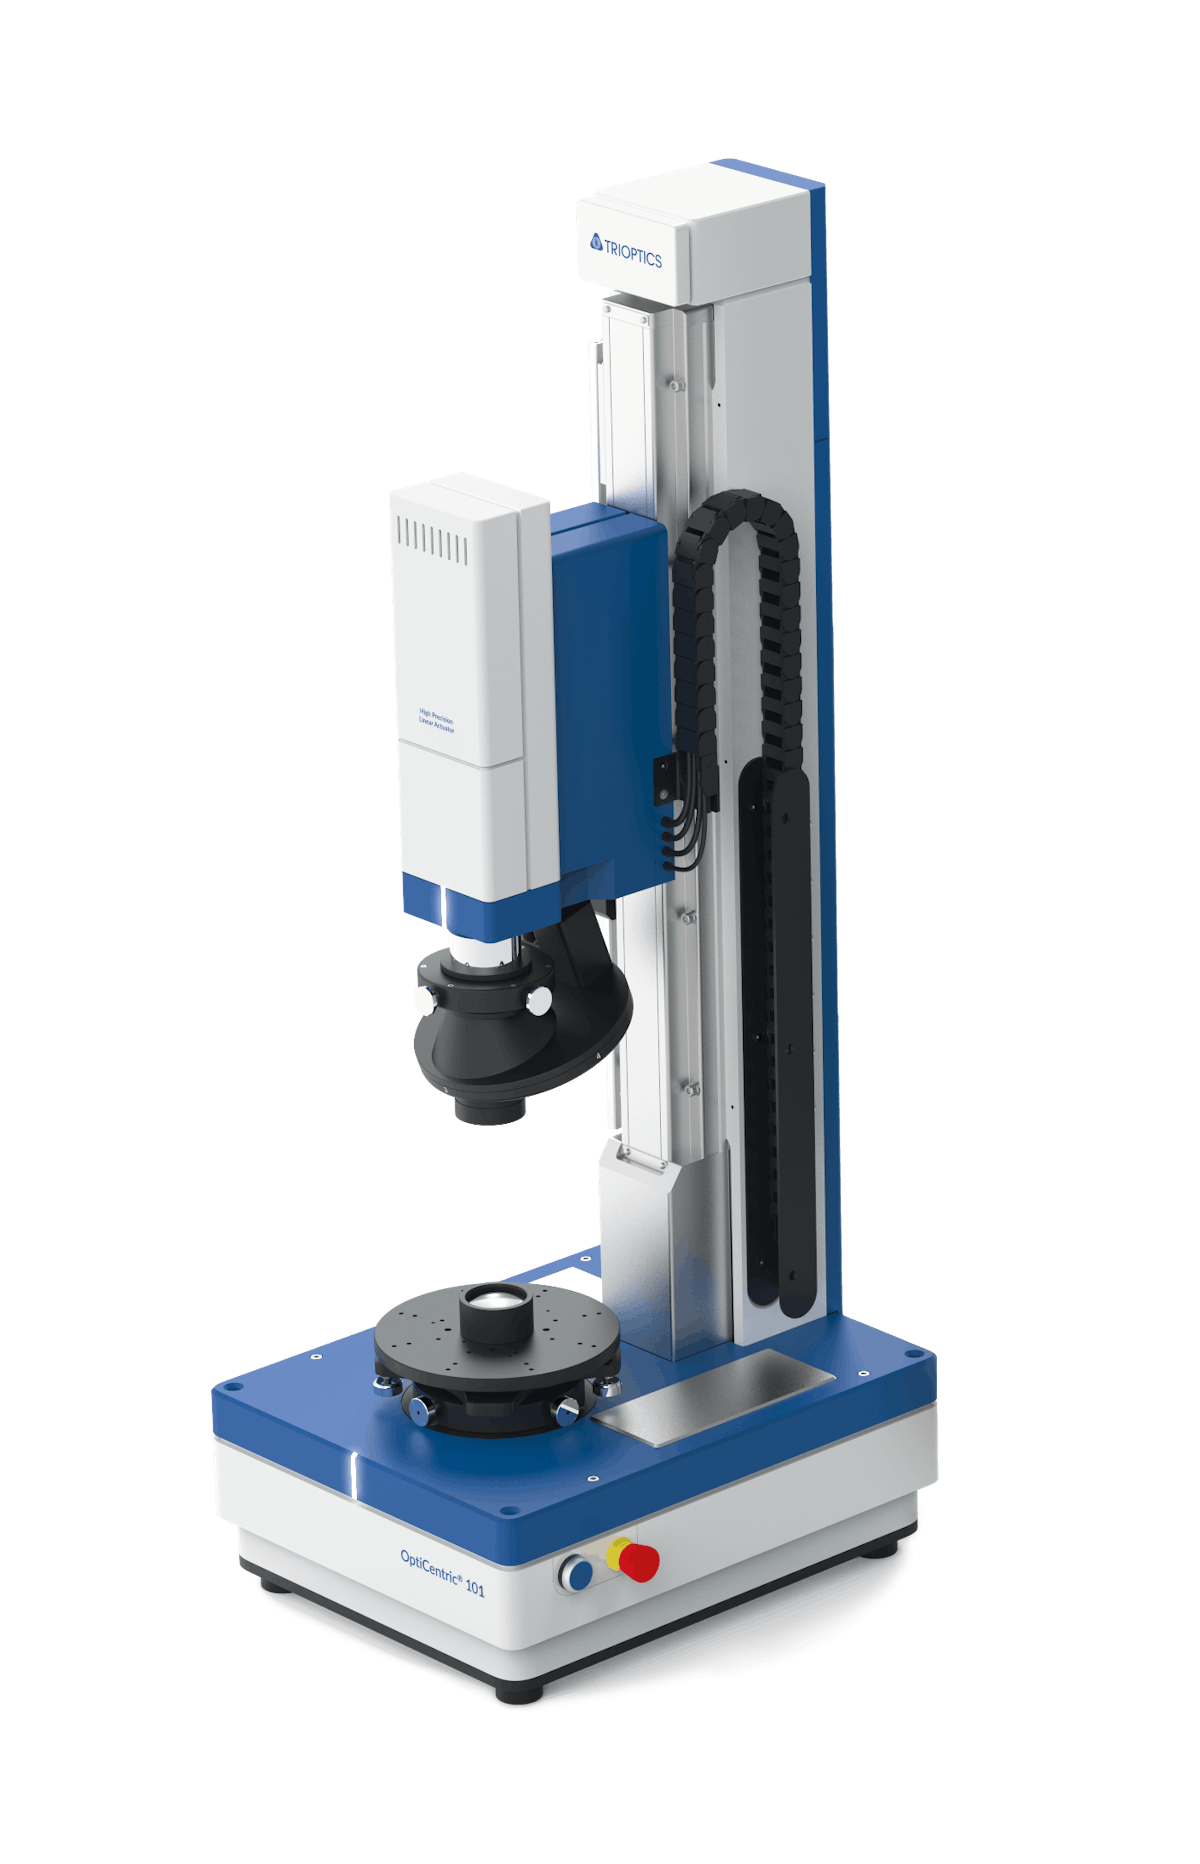 OptiCentric 3D 101 lens centration and alignment system from TRIOPTICS